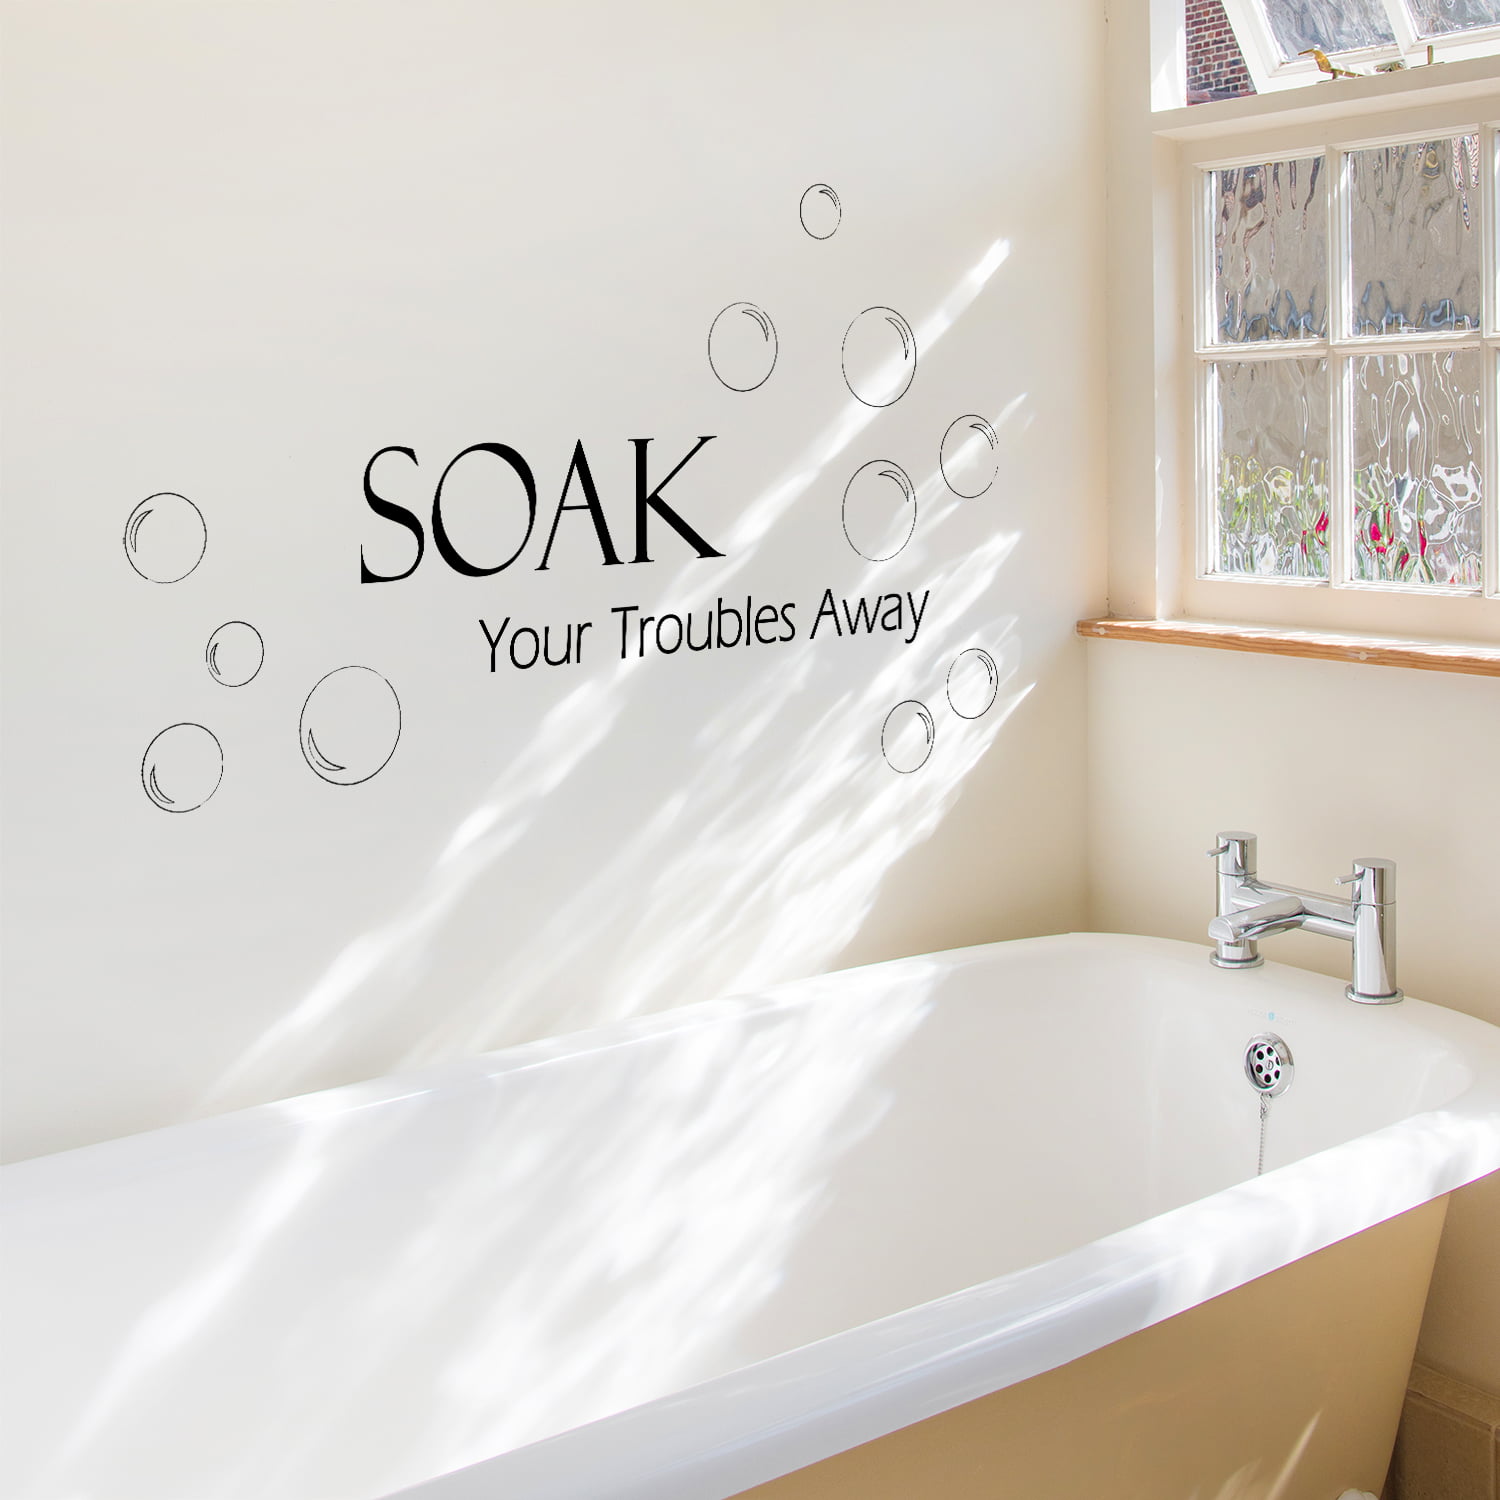 SOAK YOUR TROUBLES AWAY Bathroom words wall Quotes Wall Sticker Decal Murals W6 